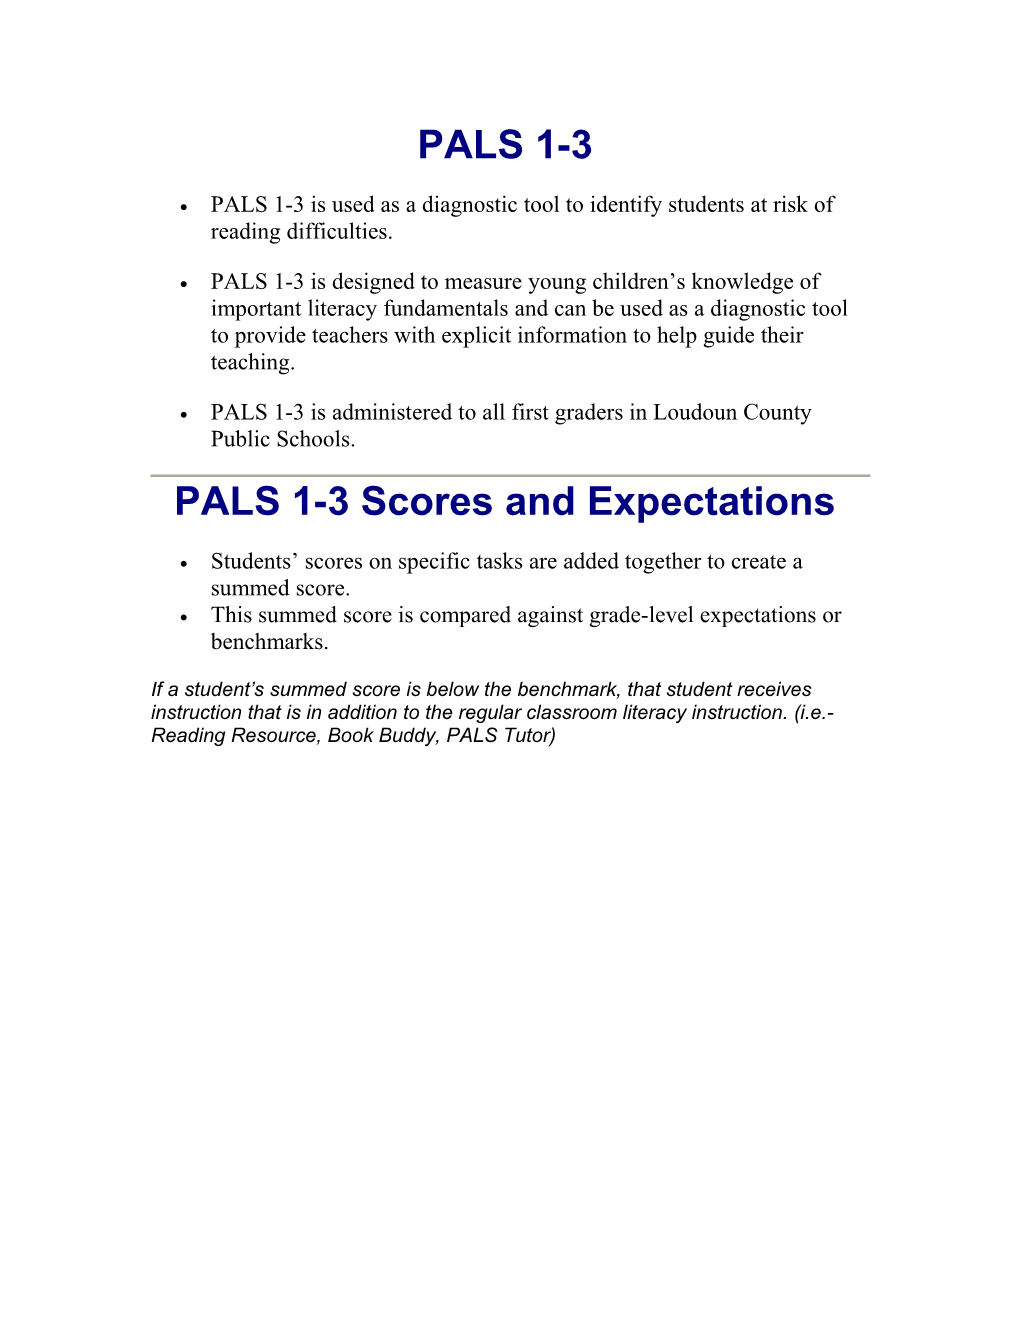 PALS 1-3 Is Used As a Diagnostic Tool to Identify Students at Risk of Reading Difficulties